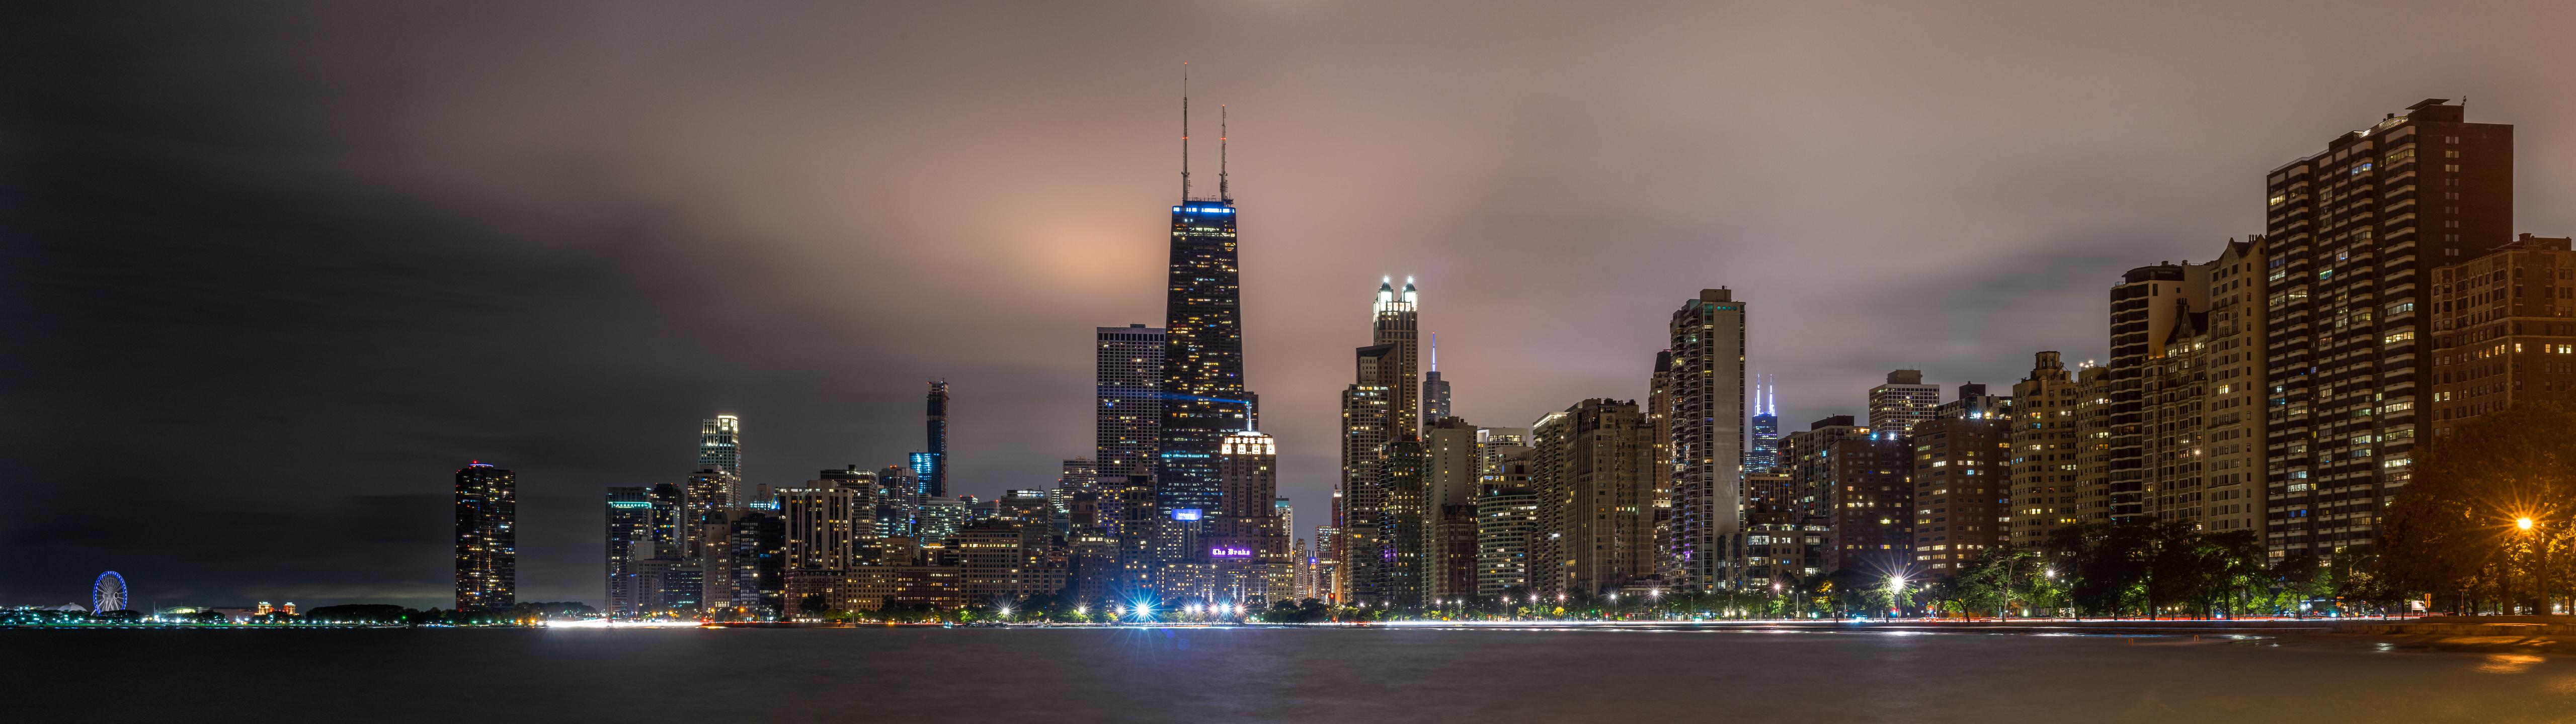 Chicago Skyline For Dual Monitors Wallpaper - Chicago - HD Wallpaper 